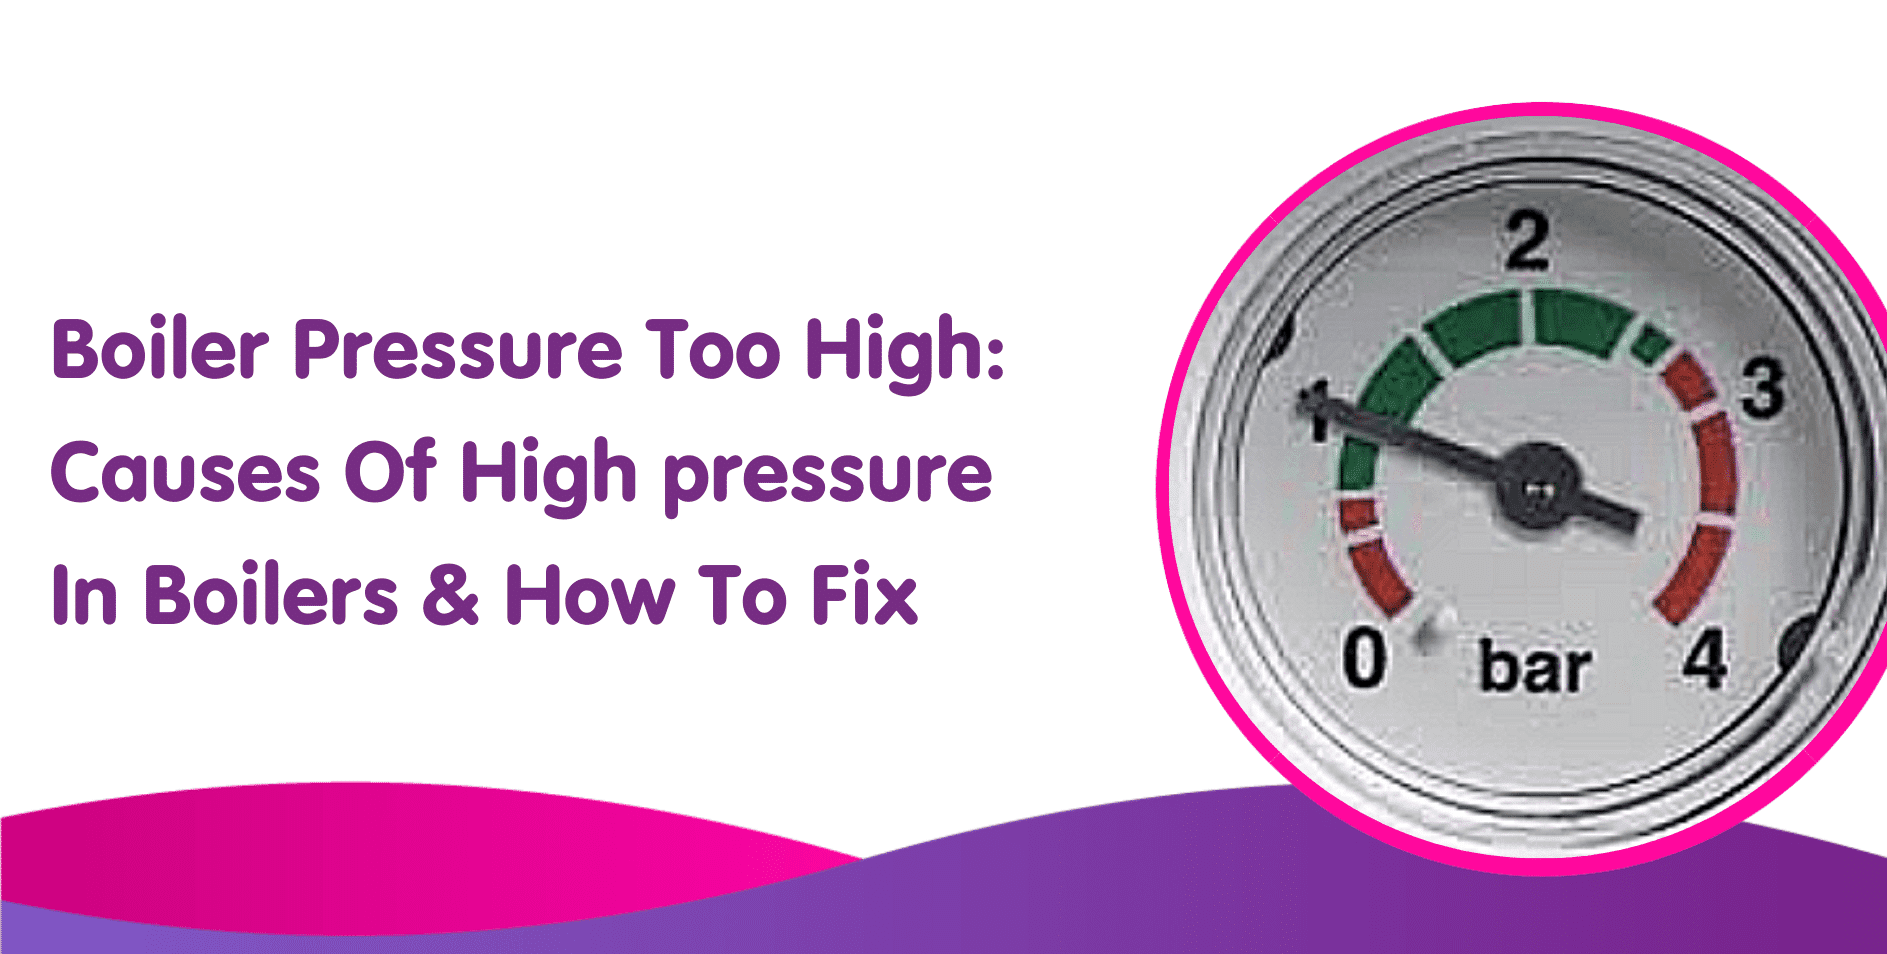 Boiler Pressure Too High: Causes Of High pressure In Boilers & How To Fix